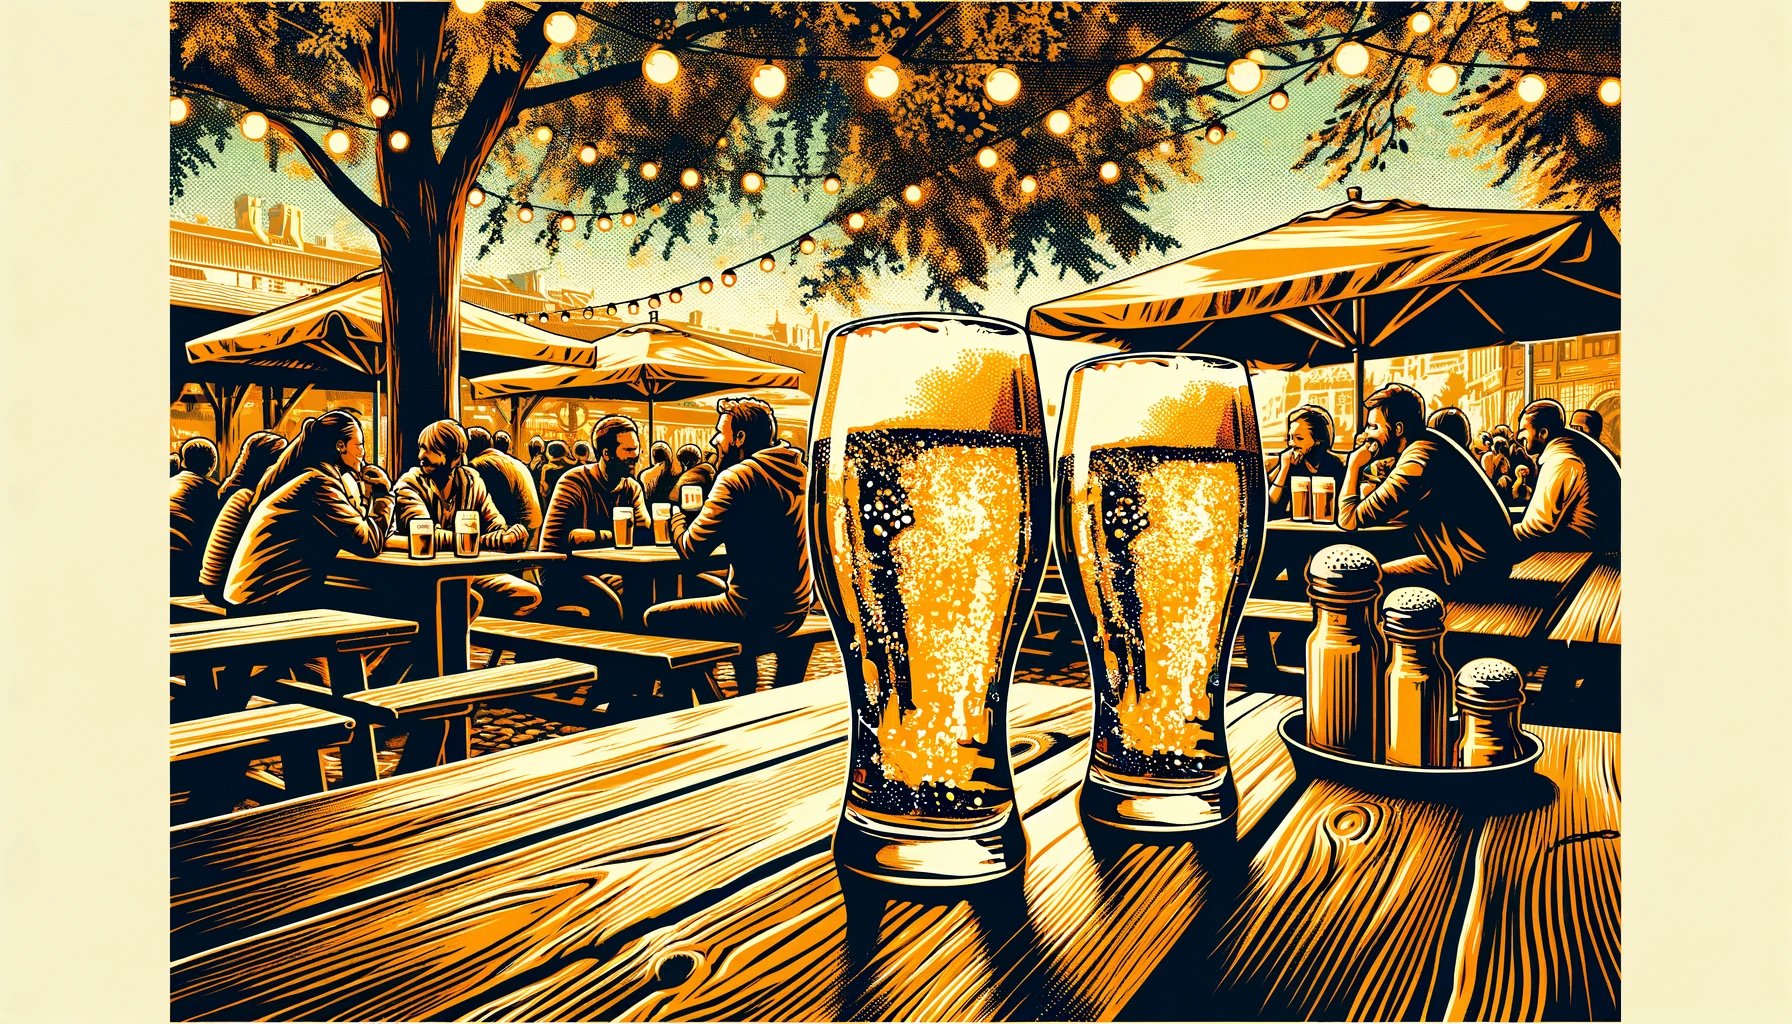 Two pilsner beers sitting on a wood table in a beer garden with patrons in the background.